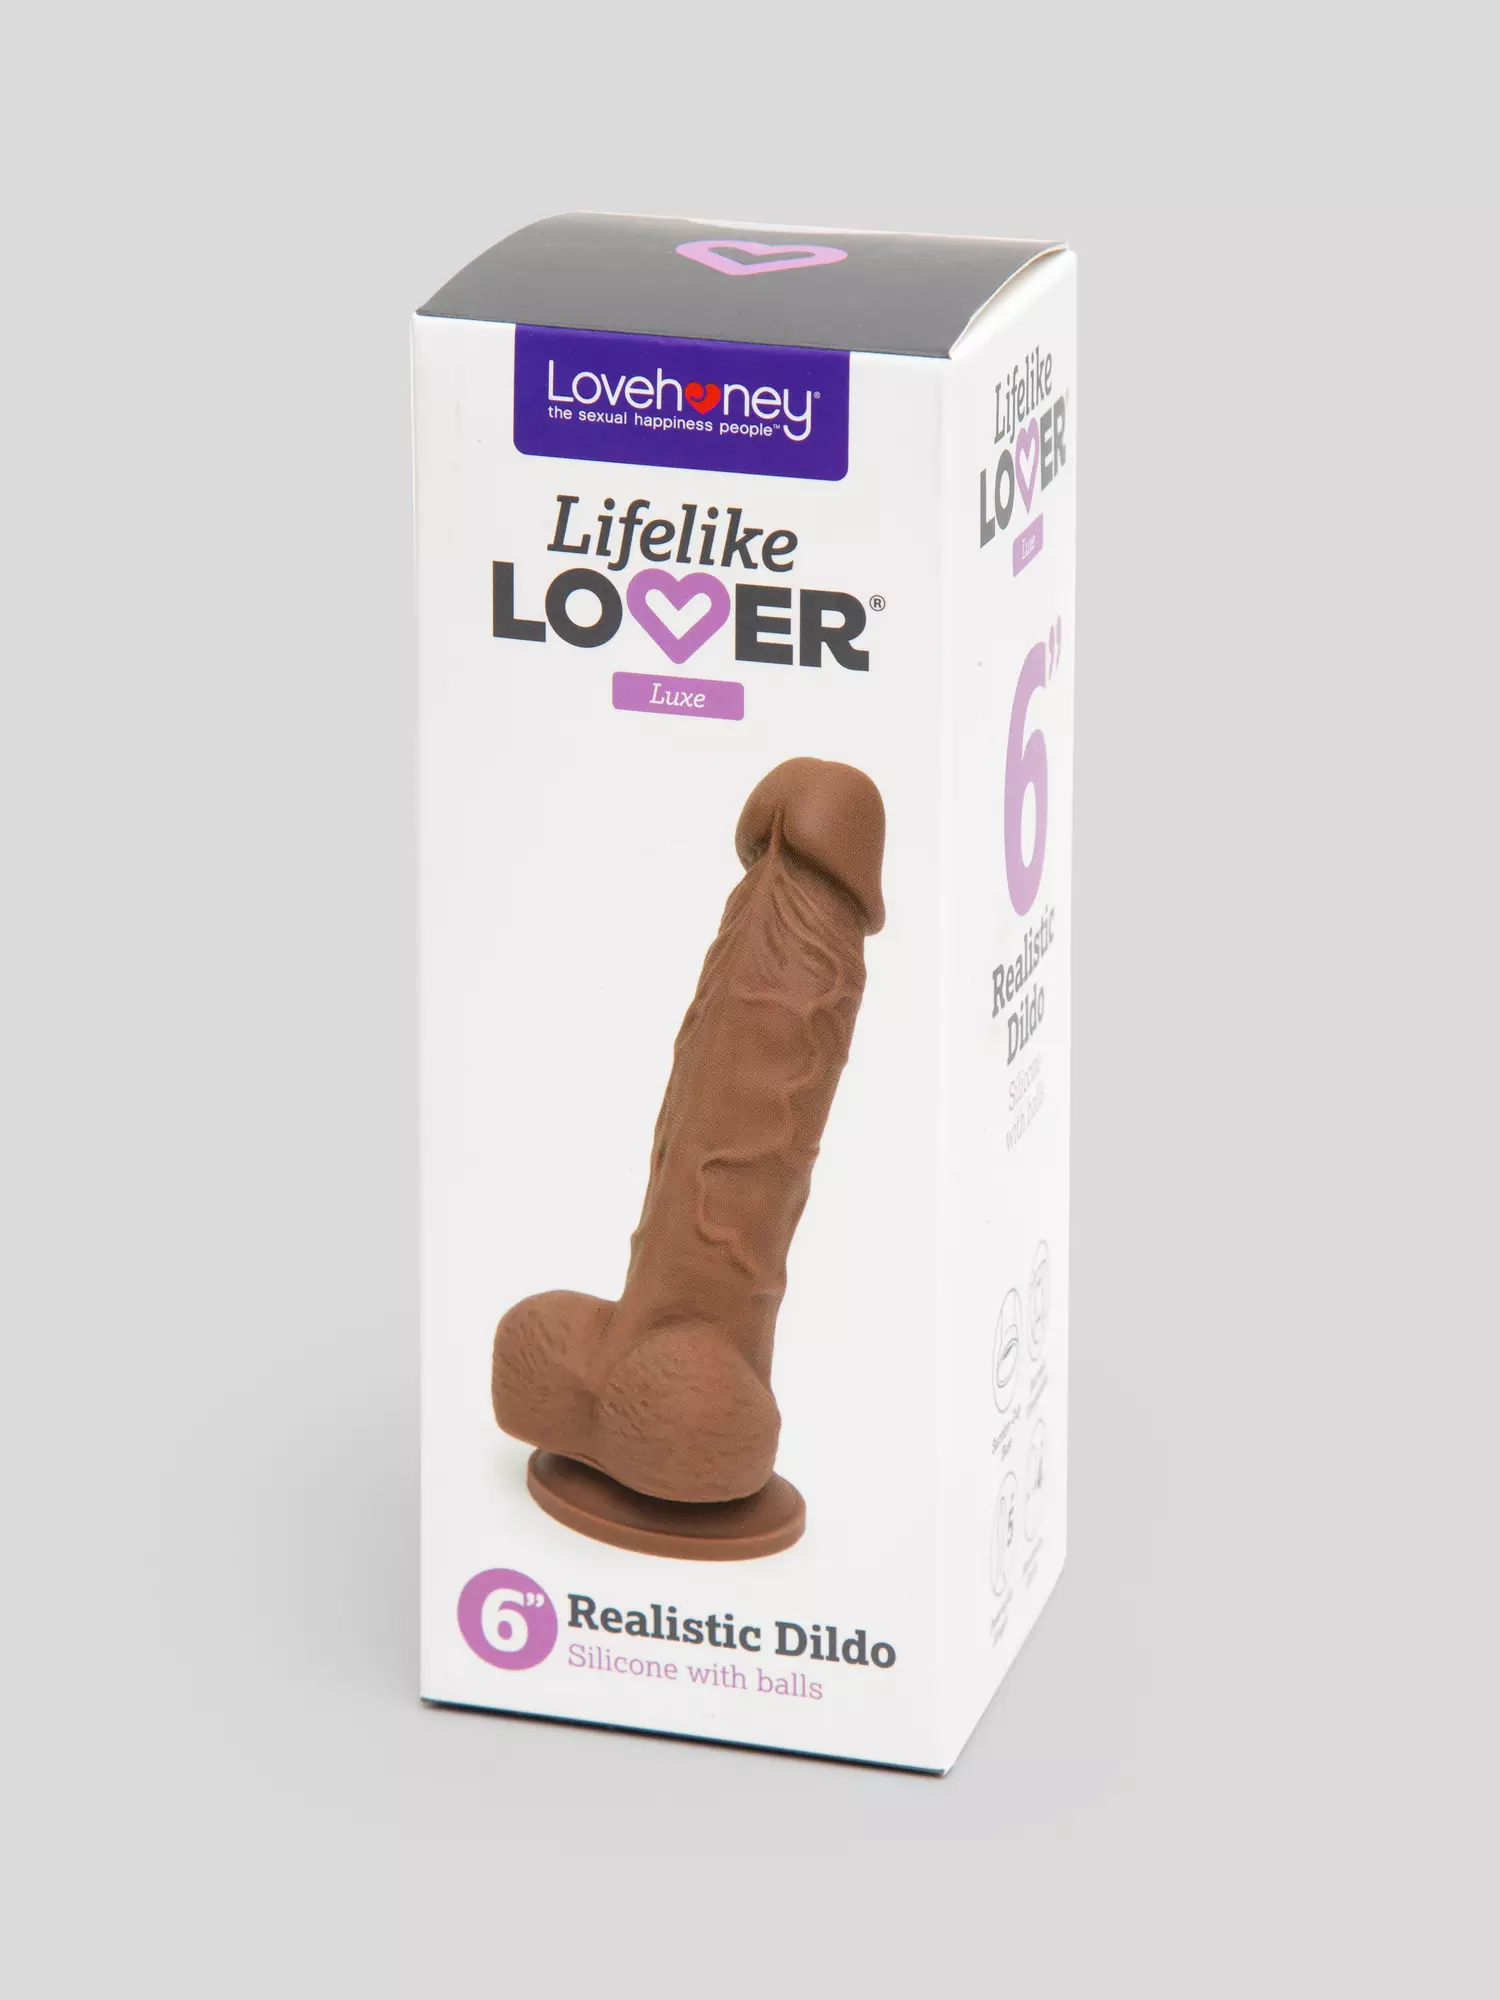 Lifelike Lover Luxe Realistic Silicone Dildo. Slide 6